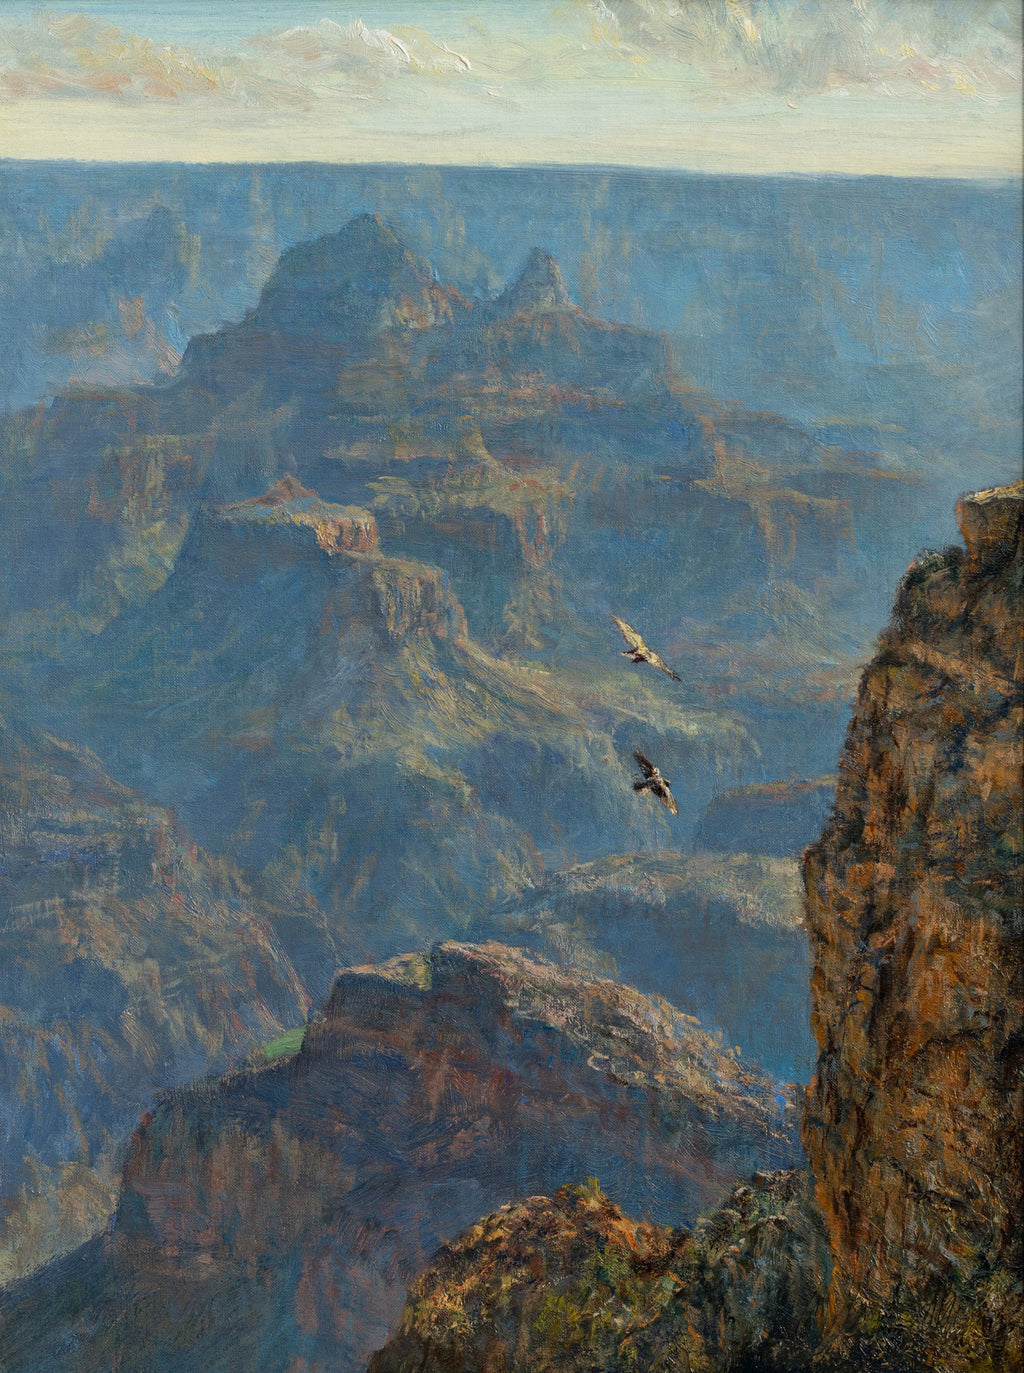 Soaring Past Powell Point, Grand Canyon Shop James McGrew 